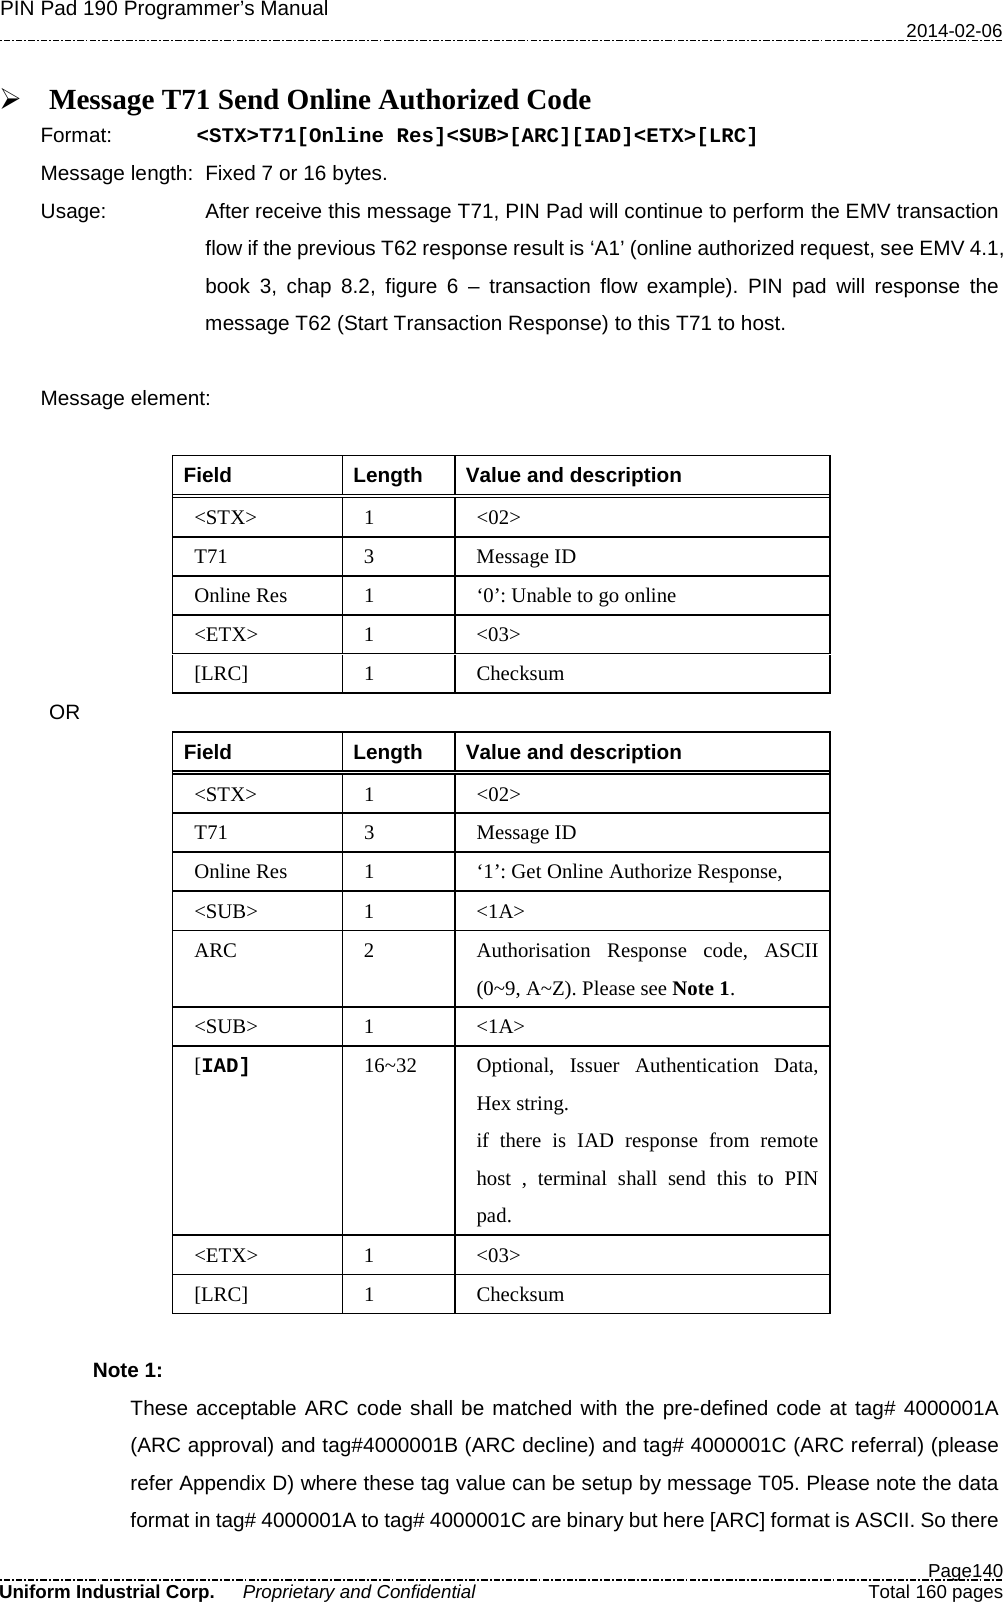 PIN Pad 190 Programmer’s Manual   2014-02-06  Page140 Uniform Industrial Corp. Proprietary and Confidential  Total 160 pages   Message T71 Send Online Authorized Code Format:   &lt;STX&gt;T71[Online Res]&lt;SUB&gt;[ARC][IAD]&lt;ETX&gt;[LRC] Message length: Fixed 7 or 16 bytes.   Usage: After receive this message T71, PIN Pad will continue to perform the EMV transaction flow if the previous T62 response result is ‘A1’ (online authorized request, see EMV 4.1, book 3, chap 8.2, figure 6 –  transaction flow example).  PIN  pad  will  response the message T62 (Start Transaction Response) to this T71 to host.  Message element:    Field  Length  Value and description &lt;STX&gt;  1  &lt;02&gt; T71  3  Message ID Online Res  1  ‘0’: Unable to go online &lt;ETX&gt;  1  &lt;03&gt; [LRC]  1  Checksum  OR Field  Length  Value and description &lt;STX&gt;  1  &lt;02&gt; T71  3  Message ID Online Res  1  ‘1’: Get Online Authorize Response, &lt;SUB&gt;  1  &lt;1A&gt; ARC  2 Authorisation Response code, ASCII (0~9, A~Z). Please see Note 1. &lt;SUB&gt;  1  &lt;1A&gt; [IAD] 16~32 Optional,  Issuer Authentication Data, Hex string. if there is IAD response from remote host , terminal shall send this to PIN pad. &lt;ETX&gt;  1  &lt;03&gt; [LRC]  1  Checksum  Note 1: These acceptable ARC code shall be matched with the pre-defined code at tag# 4000001A (ARC approval) and tag#4000001B (ARC decline) and tag# 4000001C (ARC referral) (please refer Appendix D) where these tag value can be setup by message T05. Please note the data format in tag# 4000001A to tag# 4000001C are binary but here [ARC] format is ASCII. So there 